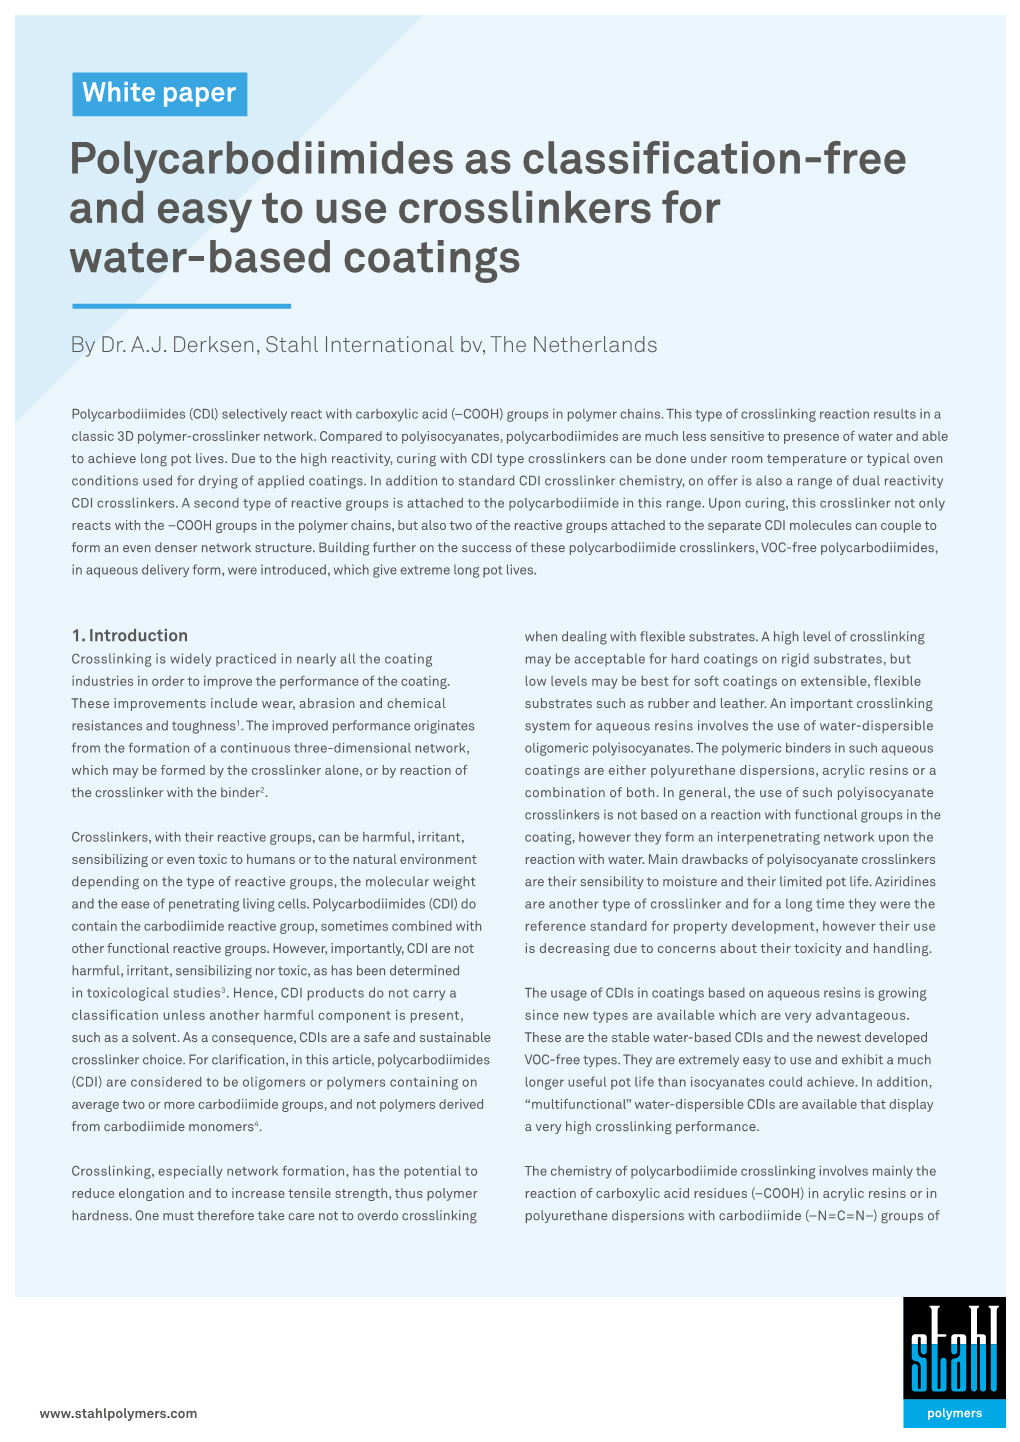 Polycarbodiimides As Classification-Free and Easy to Use Crosslinkers for Water-Based Coatings